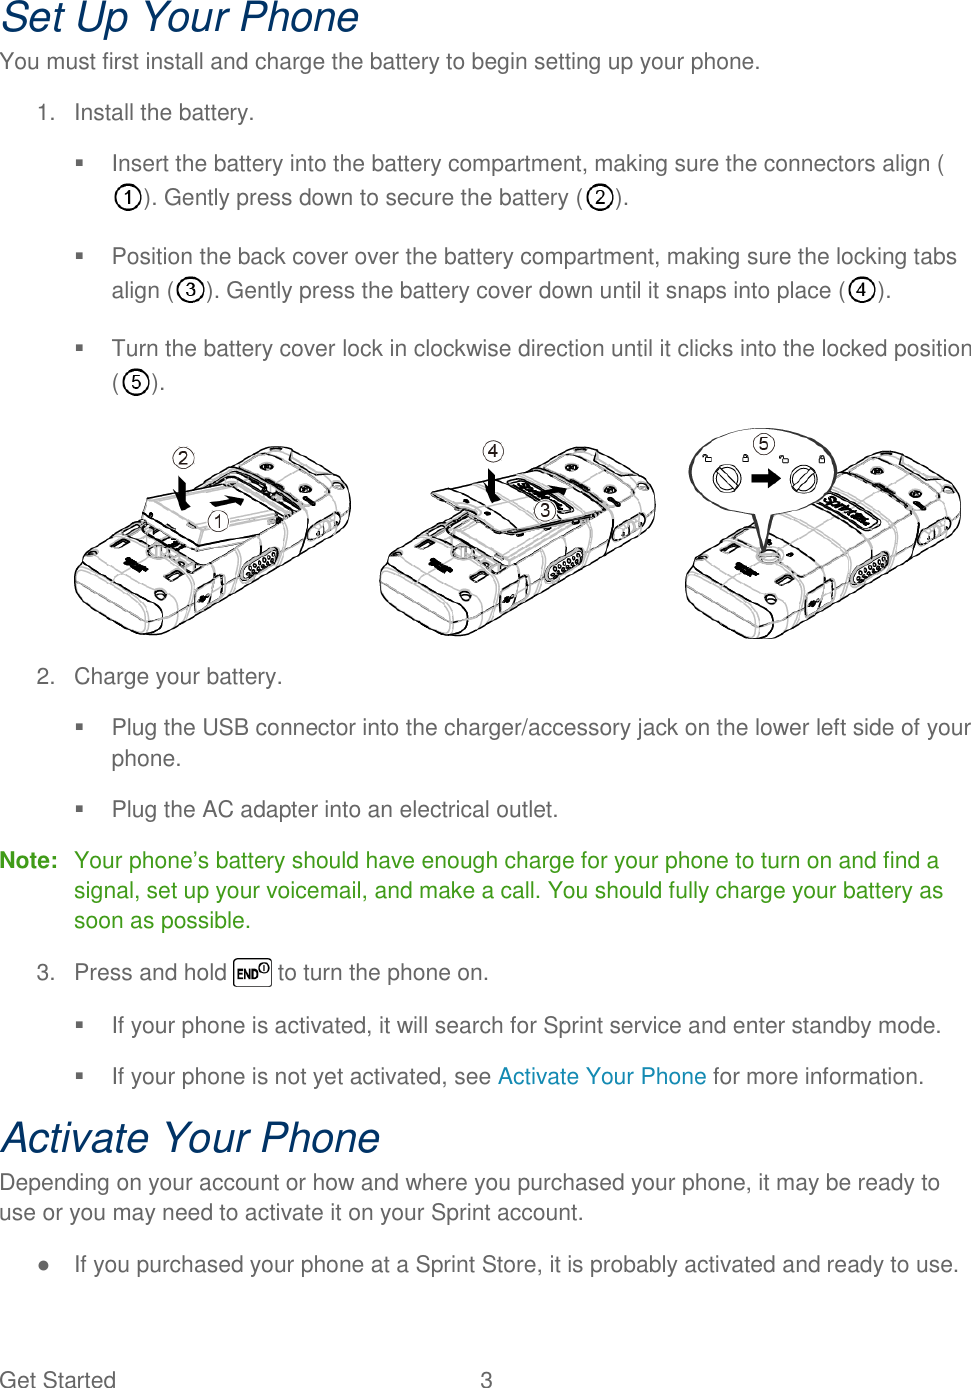 Get Started  3 Set Up Your Phone You must first install and charge the battery to begin setting up your phone. 1.  Install the battery.   Insert the battery into the battery compartment, making sure the connectors align (). Gently press down to secure the battery ( ).   Position the back cover over the battery compartment, making sure the locking tabs align ( ). Gently press the battery cover down until it snaps into place ( ).   Turn the battery cover lock in clockwise direction until it clicks into the locked position ().  2.  Charge your battery.   Plug the USB connector into the charger/accessory jack on the lower left side of your phone.   Plug the AC adapter into an electrical outlet. Note:  Your phone‘s battery should have enough charge for your phone to turn on and find a signal, set up your voicemail, and make a call. You should fully charge your battery as soon as possible. 3.  Press and hold   to turn the phone on.   If your phone is activated, it will search for Sprint service and enter standby mode.   If your phone is not yet activated, see Activate Your Phone for more information. Activate Your Phone Depending on your account or how and where you purchased your phone, it may be ready to use or you may need to activate it on your Sprint account. ●  If you purchased your phone at a Sprint Store, it is probably activated and ready to use. 